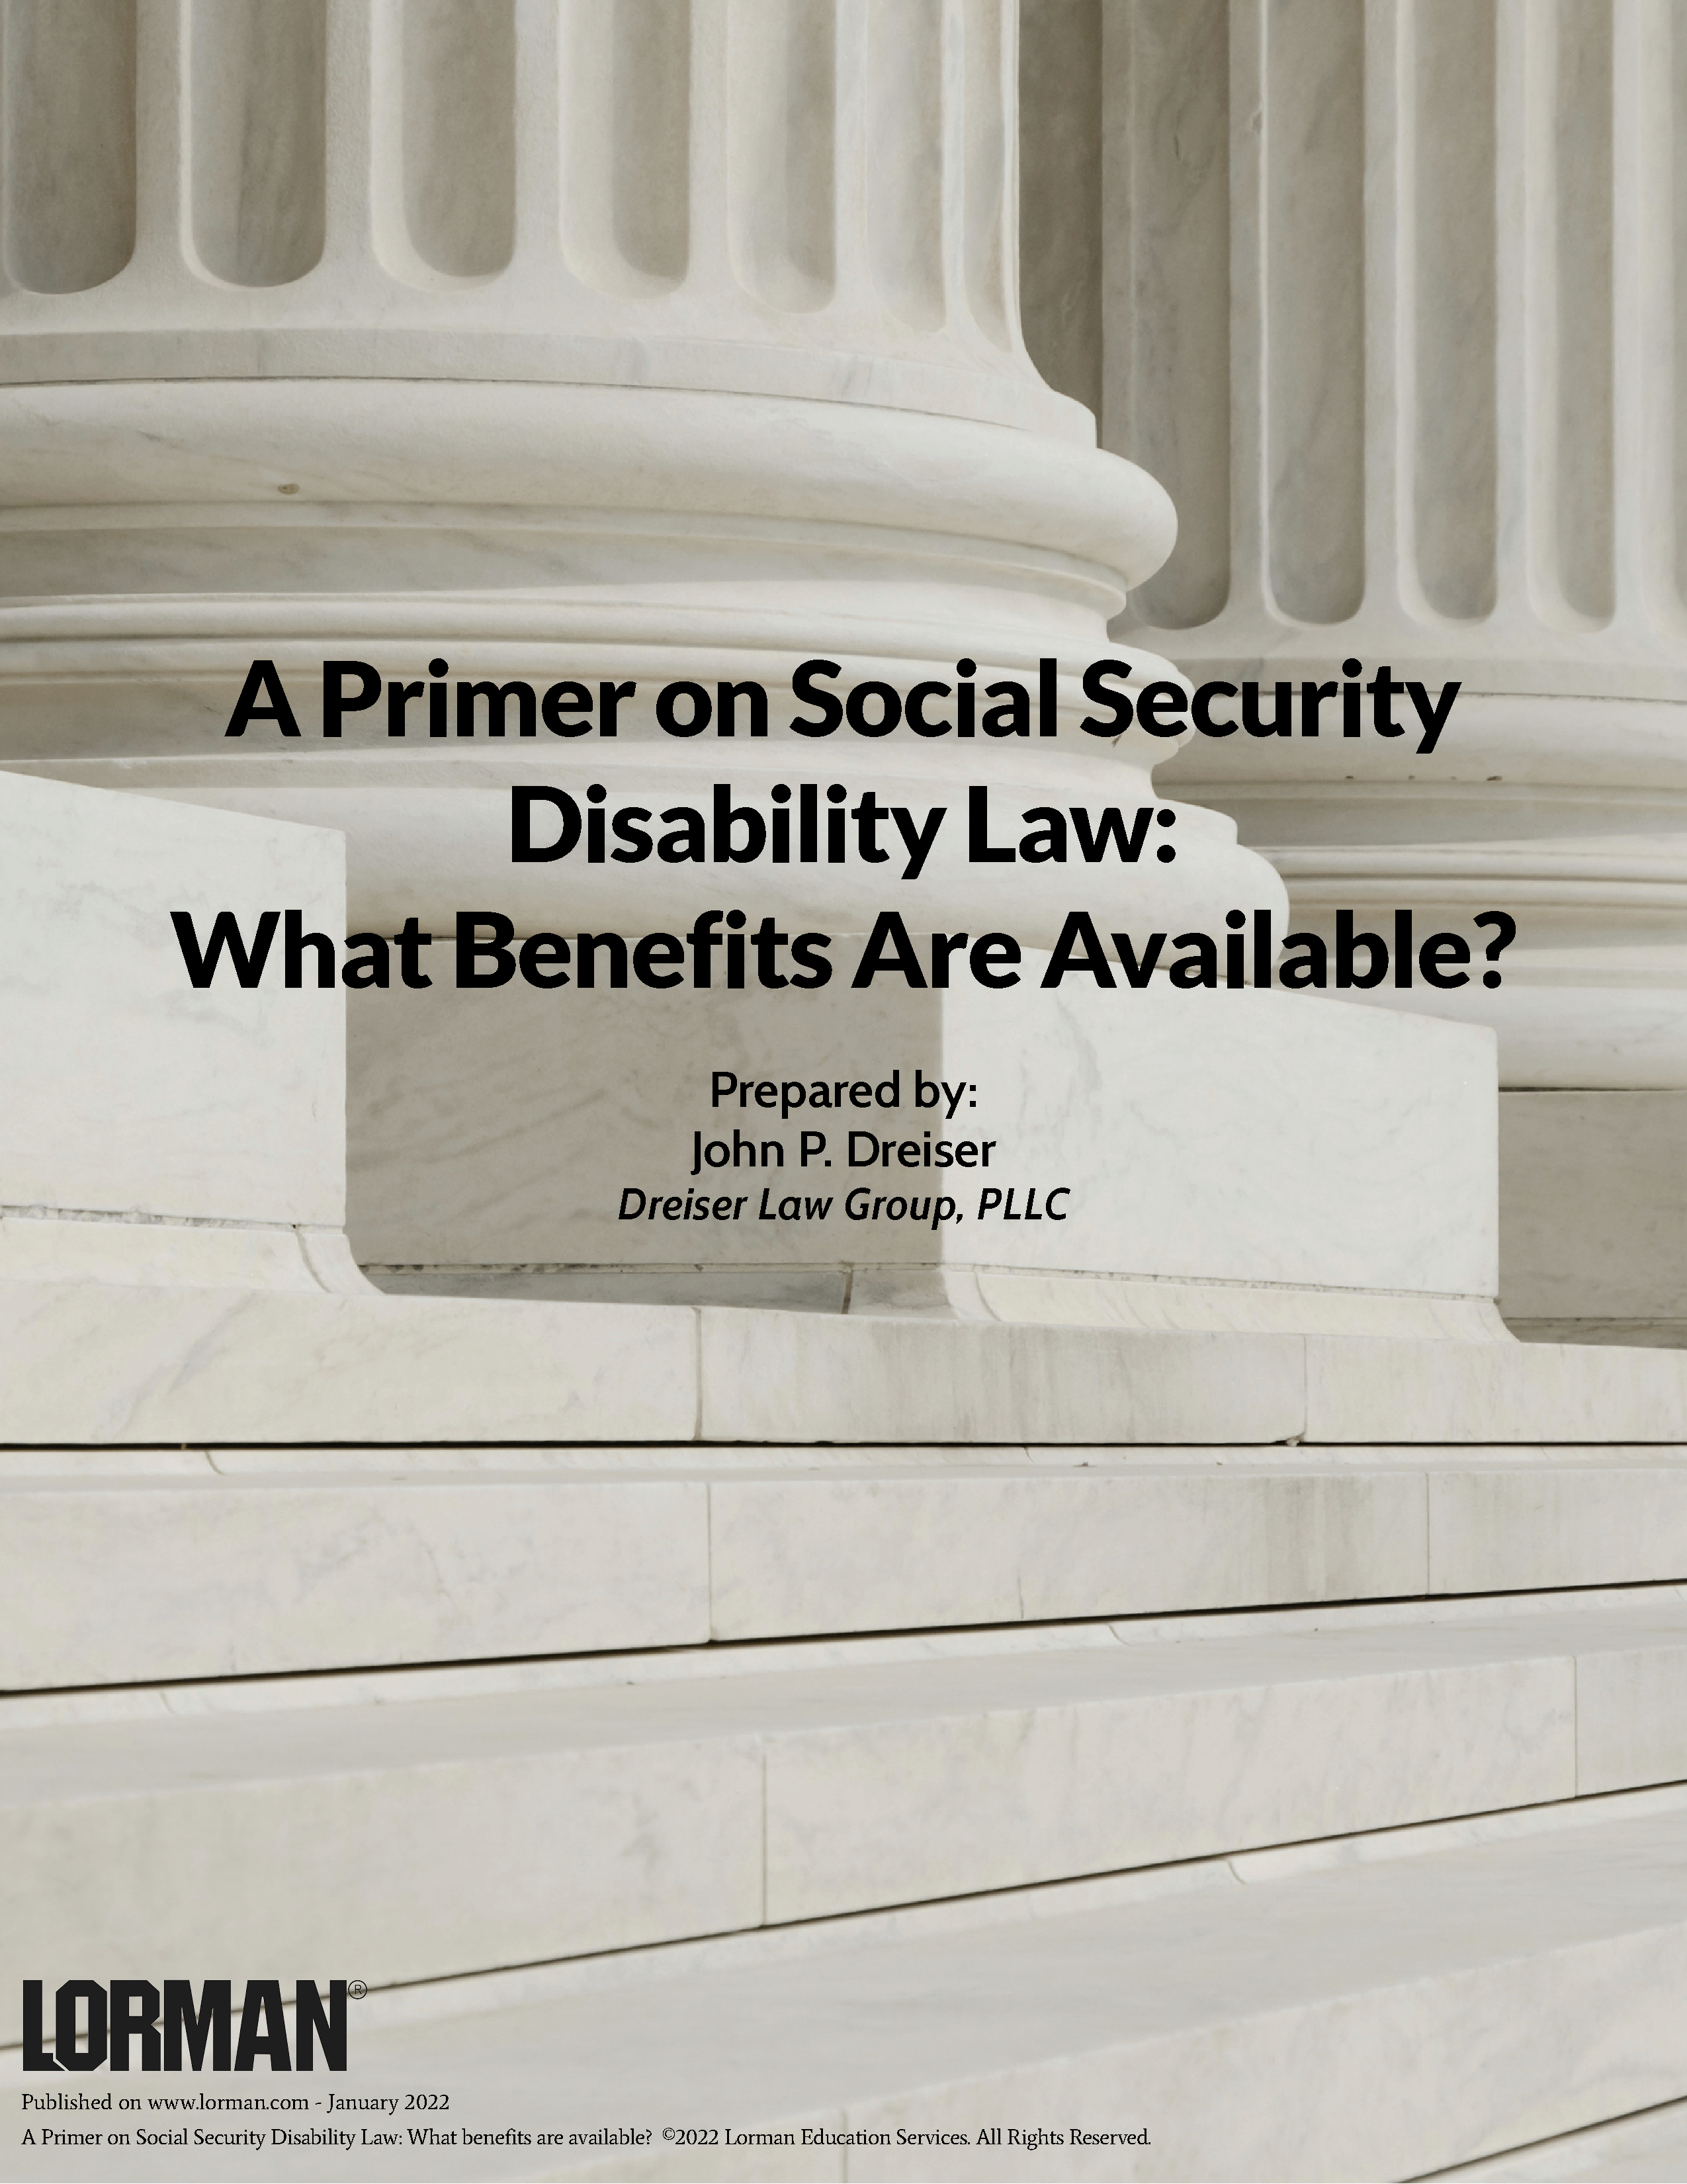 A Primer on Social Security Disability Law